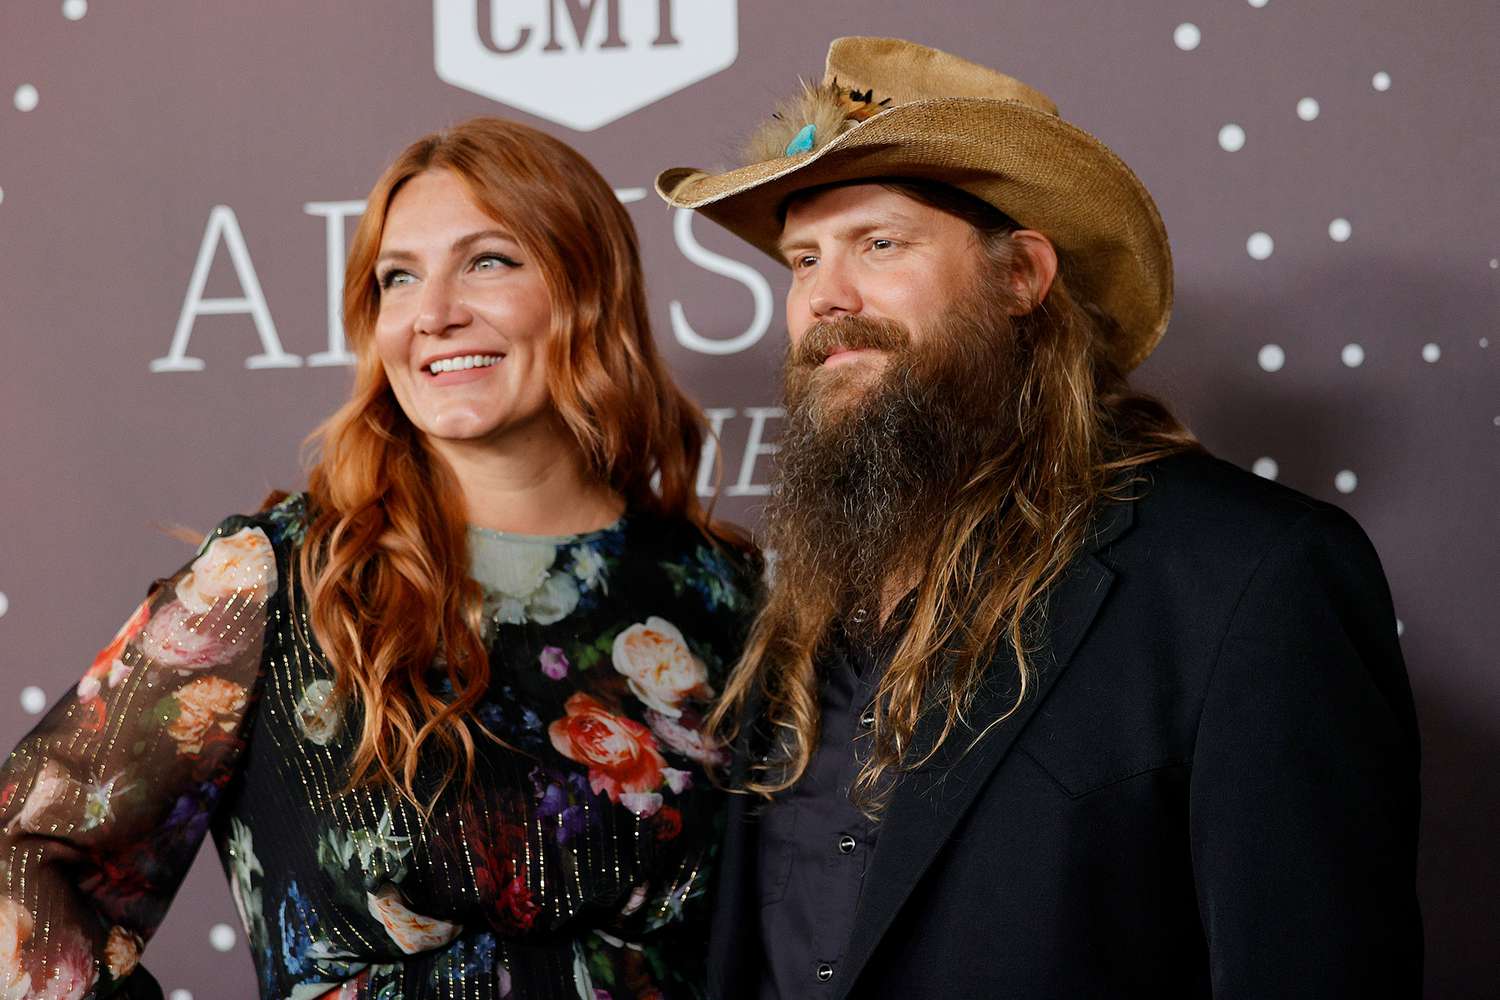 What is Chris Stapleton Net Worth in 2022? Latest Updates on Early Life, Career and Earnings